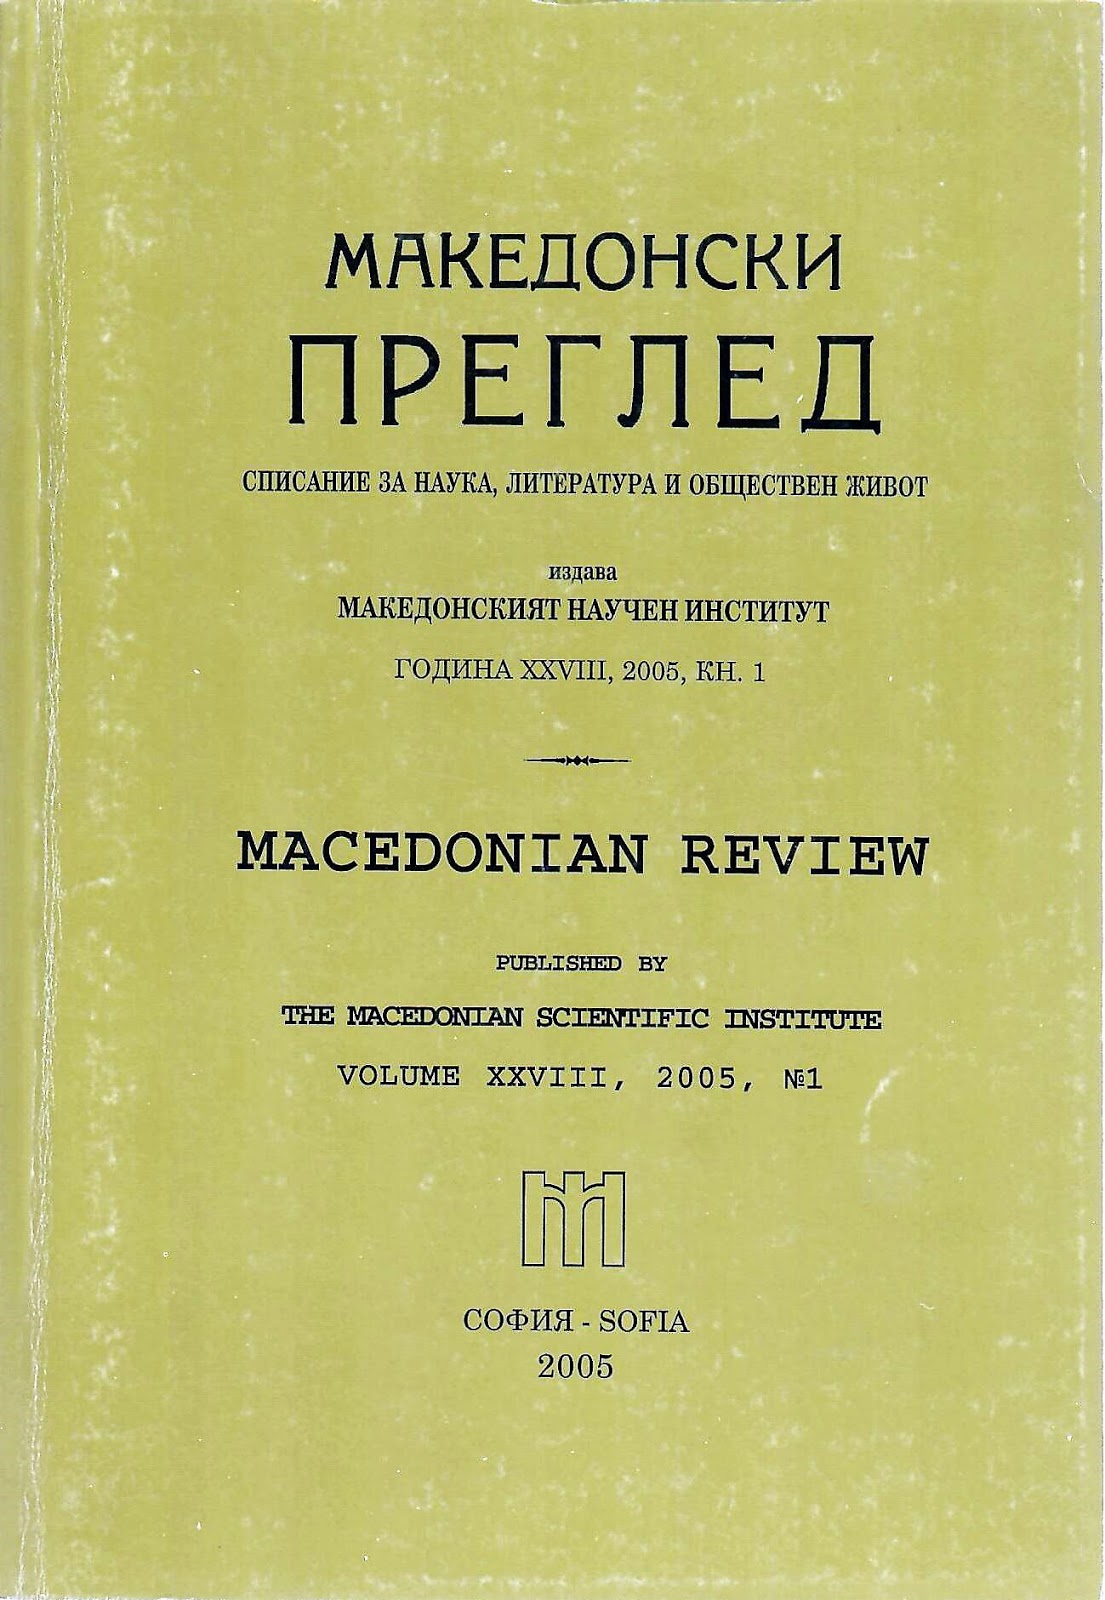 History in Rhymes (Macedonian Bulgarians in the Venko's "Bulgariad") Cover Image